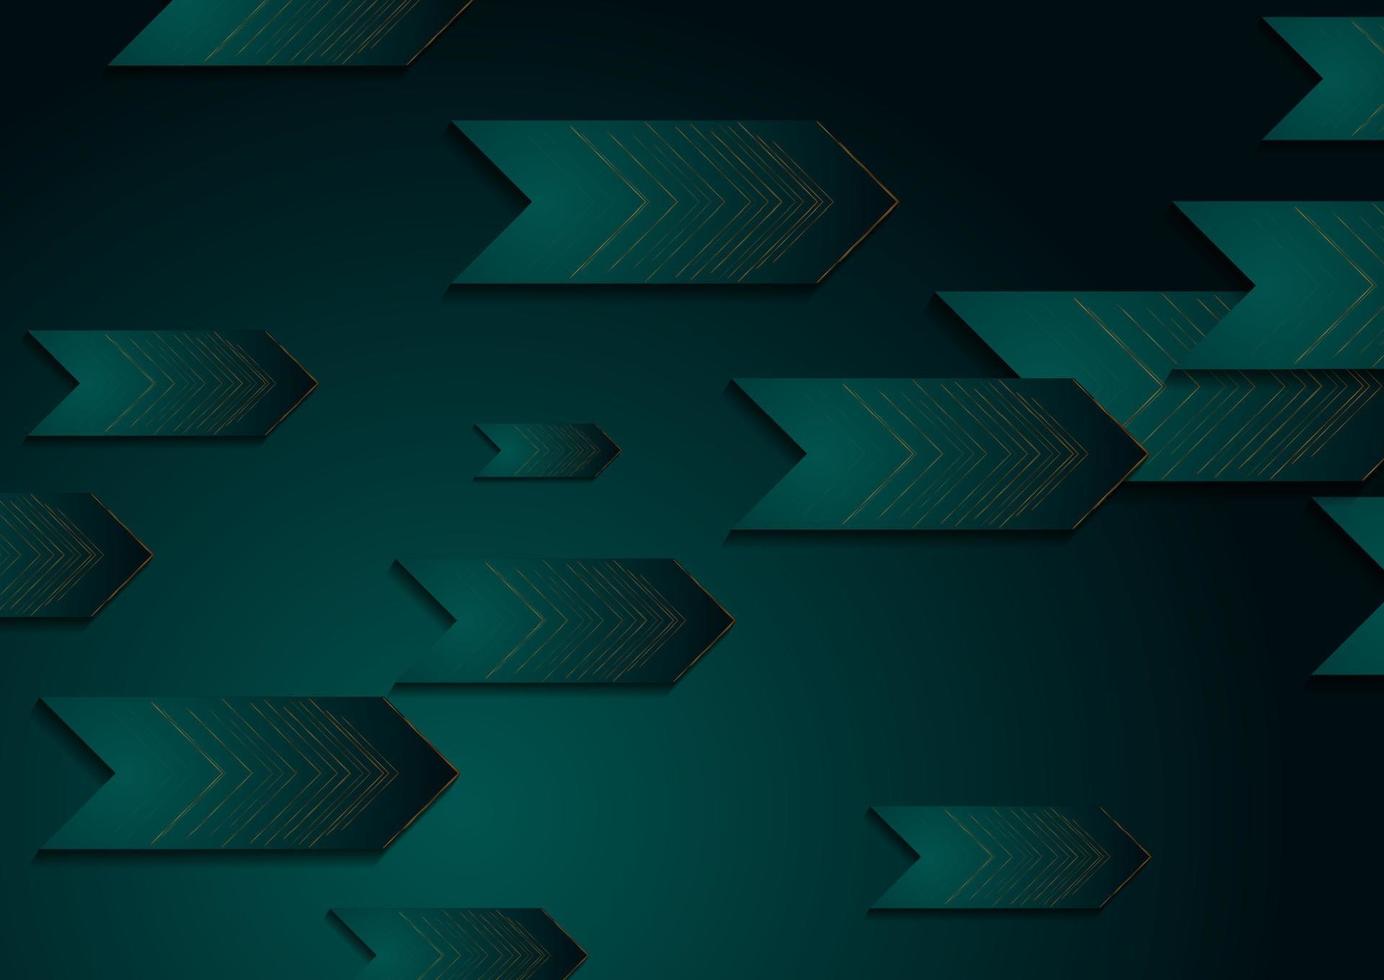 Turquoise and golden arrows abstract techology background vector